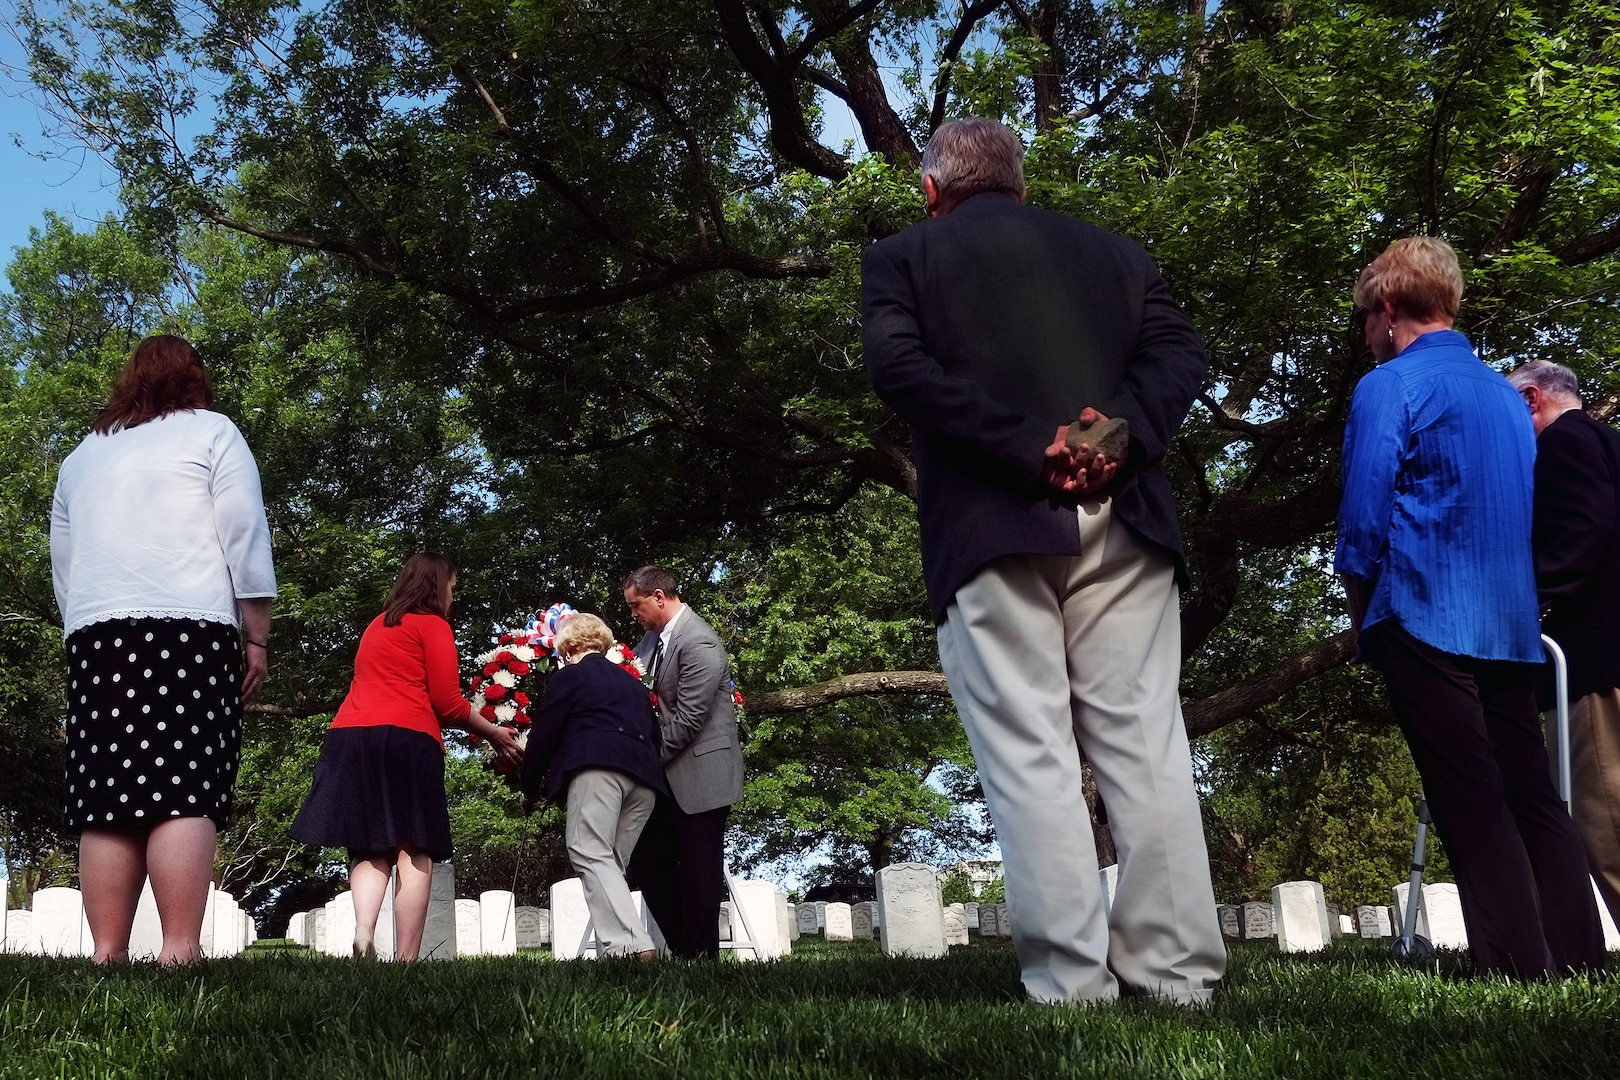 As other family members look on, Barbara Christman Page, center, Lauren Christman, left in red, and Jim Christman lay a wreath at the grave of Army Pvt. William Christman, of the 67th Pennsylvania Infantry Regiment and the first Soldier interred at Arlington National Cemetery, during a ceremony at the cemetery marking the 150th anniversary of Pvt. Christman's burial and the start of Arlington as a burial ground.